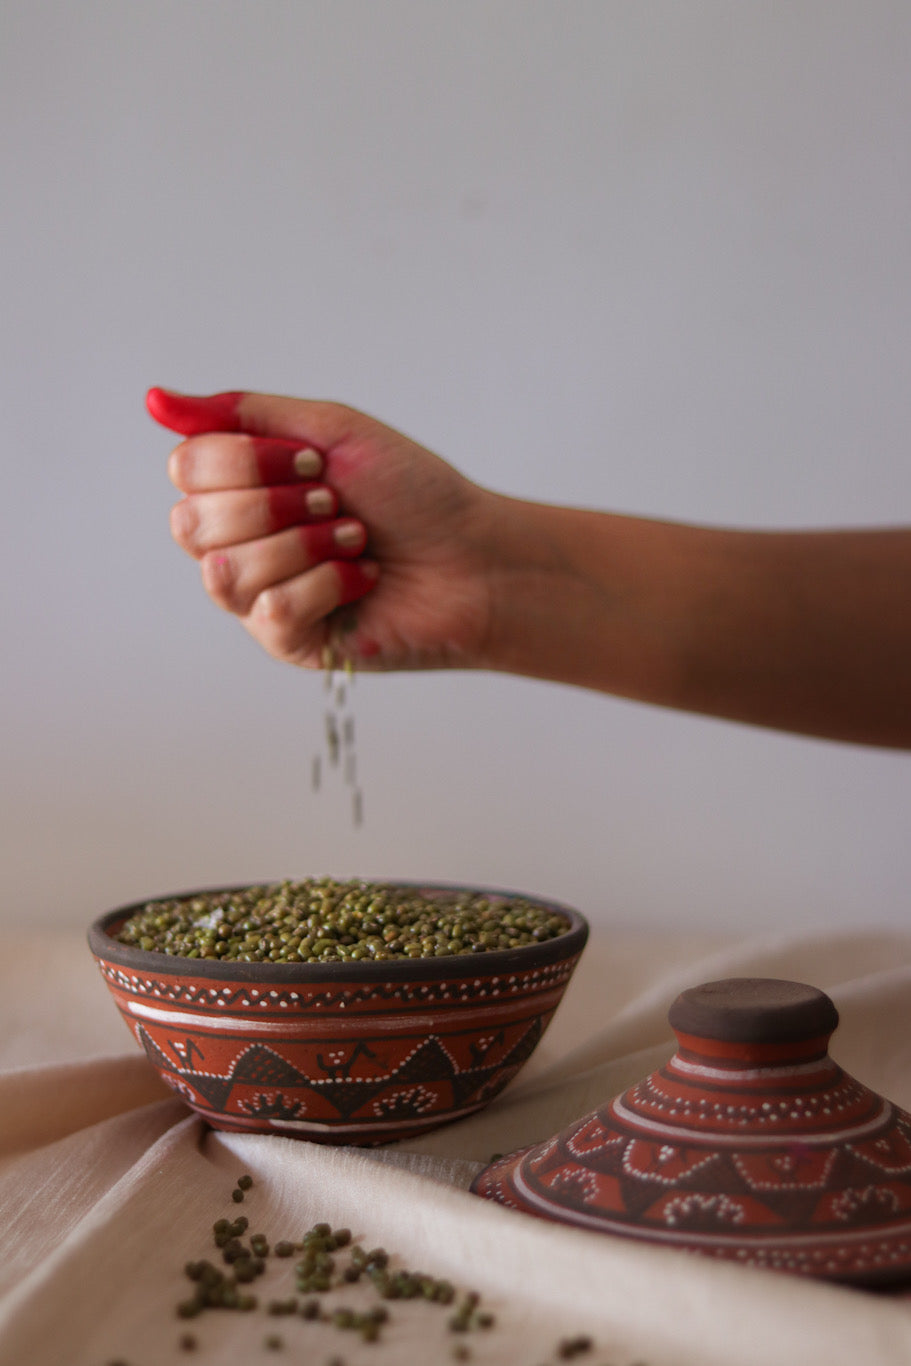 a woman is sprinkling seeds into a a red hand painted pottery serving bowl